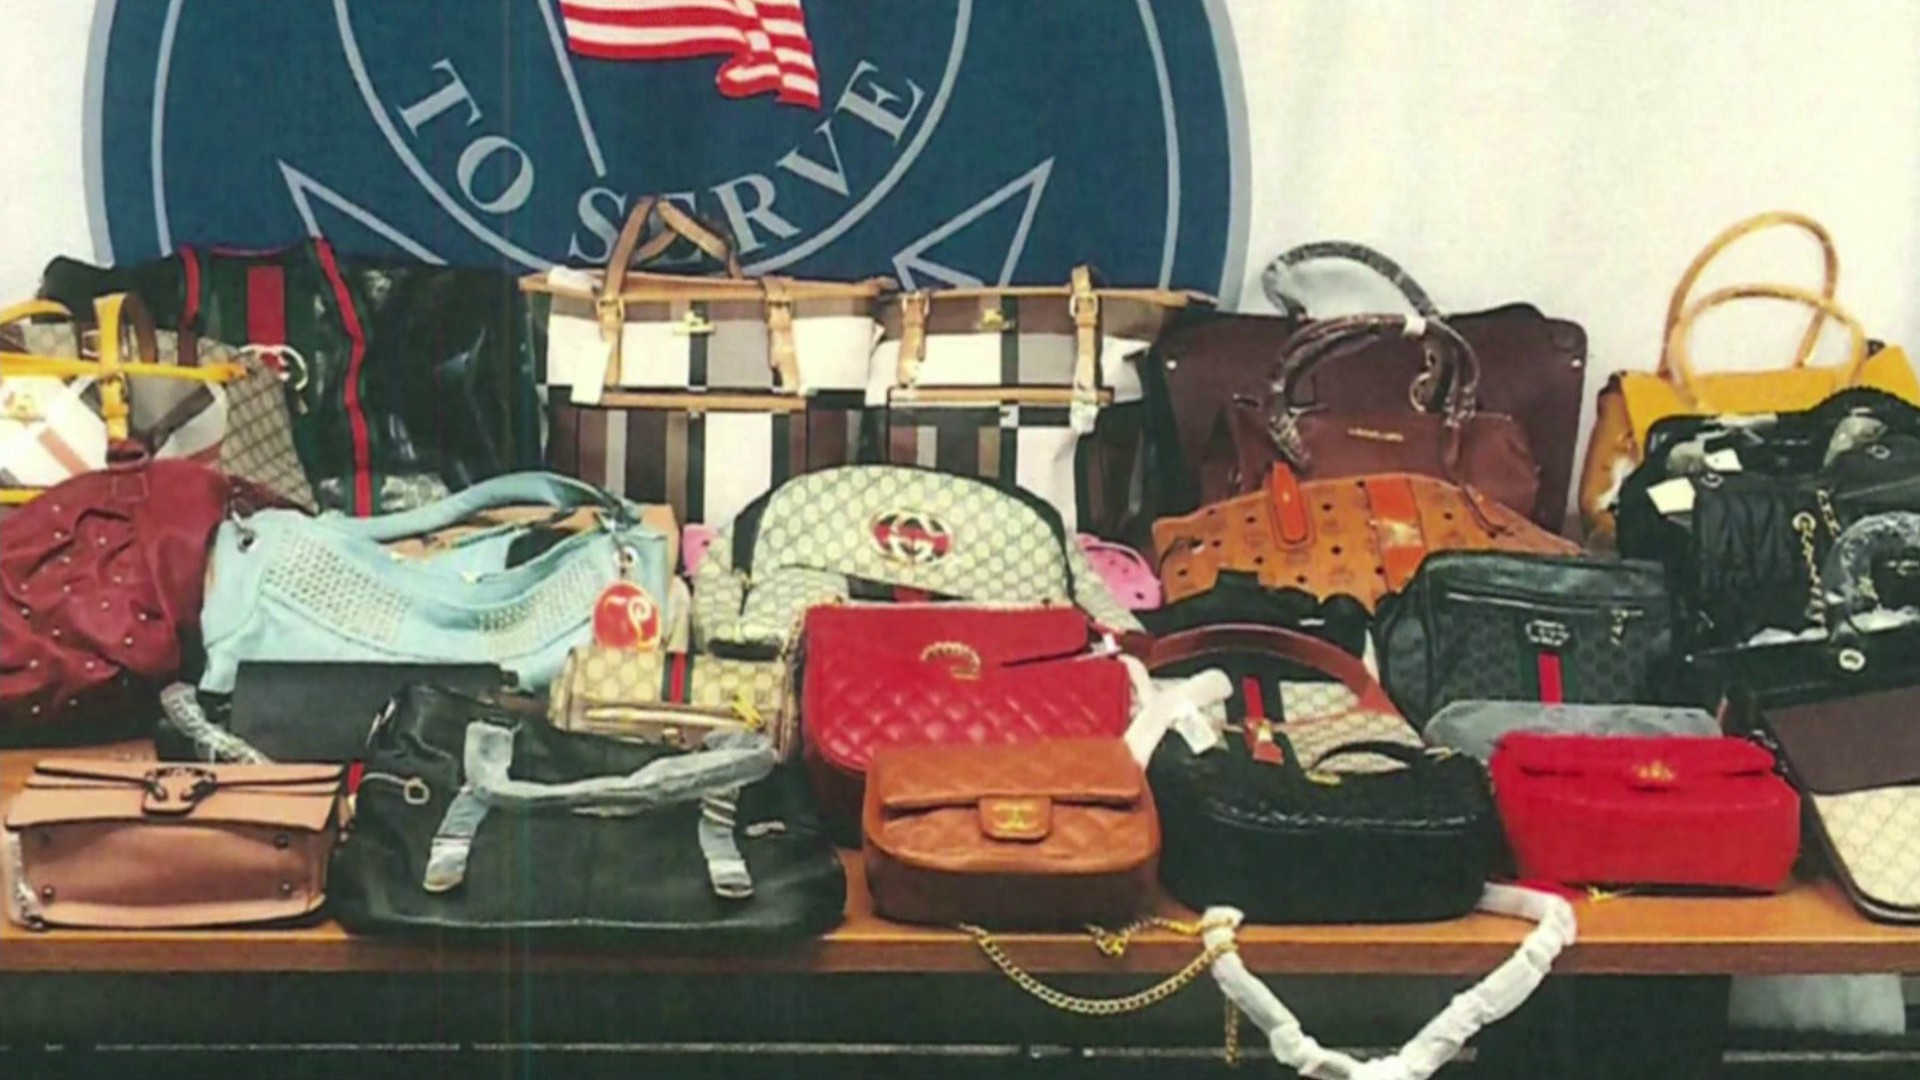 Detroit police seize nearly 700 fake designer bags after suspect